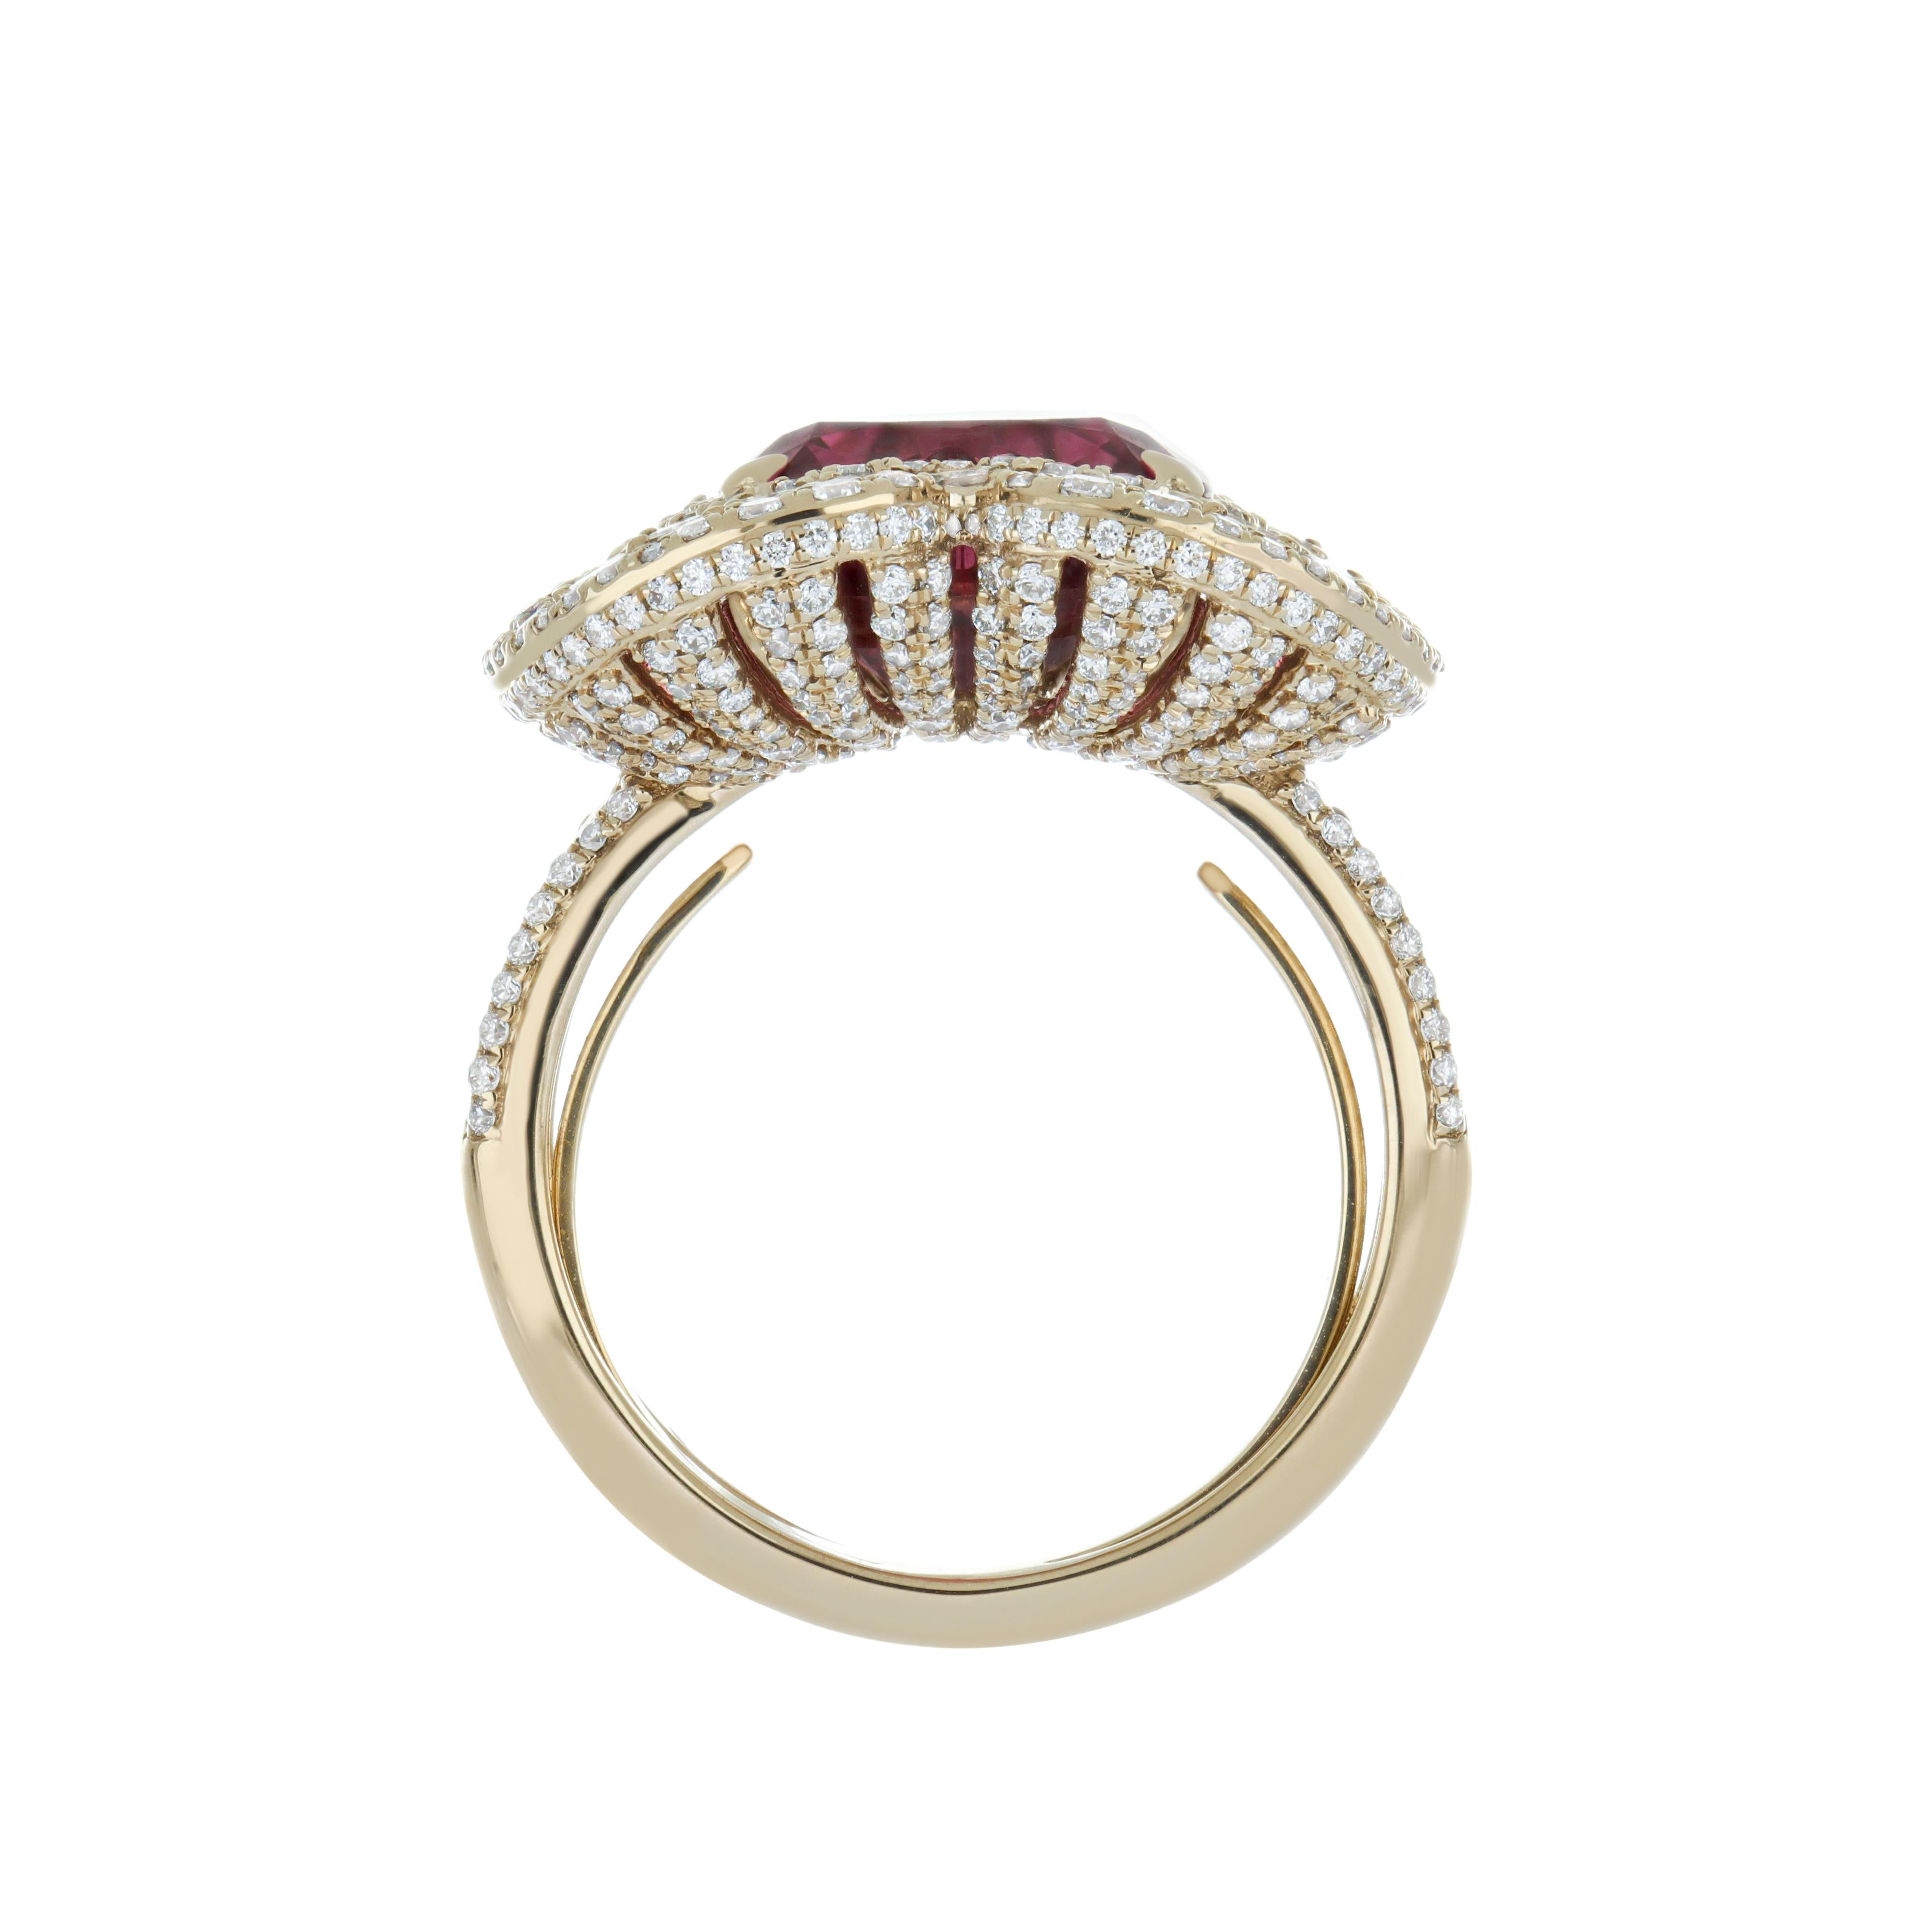 4.9 Carat Rubellite and Diamond Studded Ring in 18K Yellow Gold Ring For Sale 1